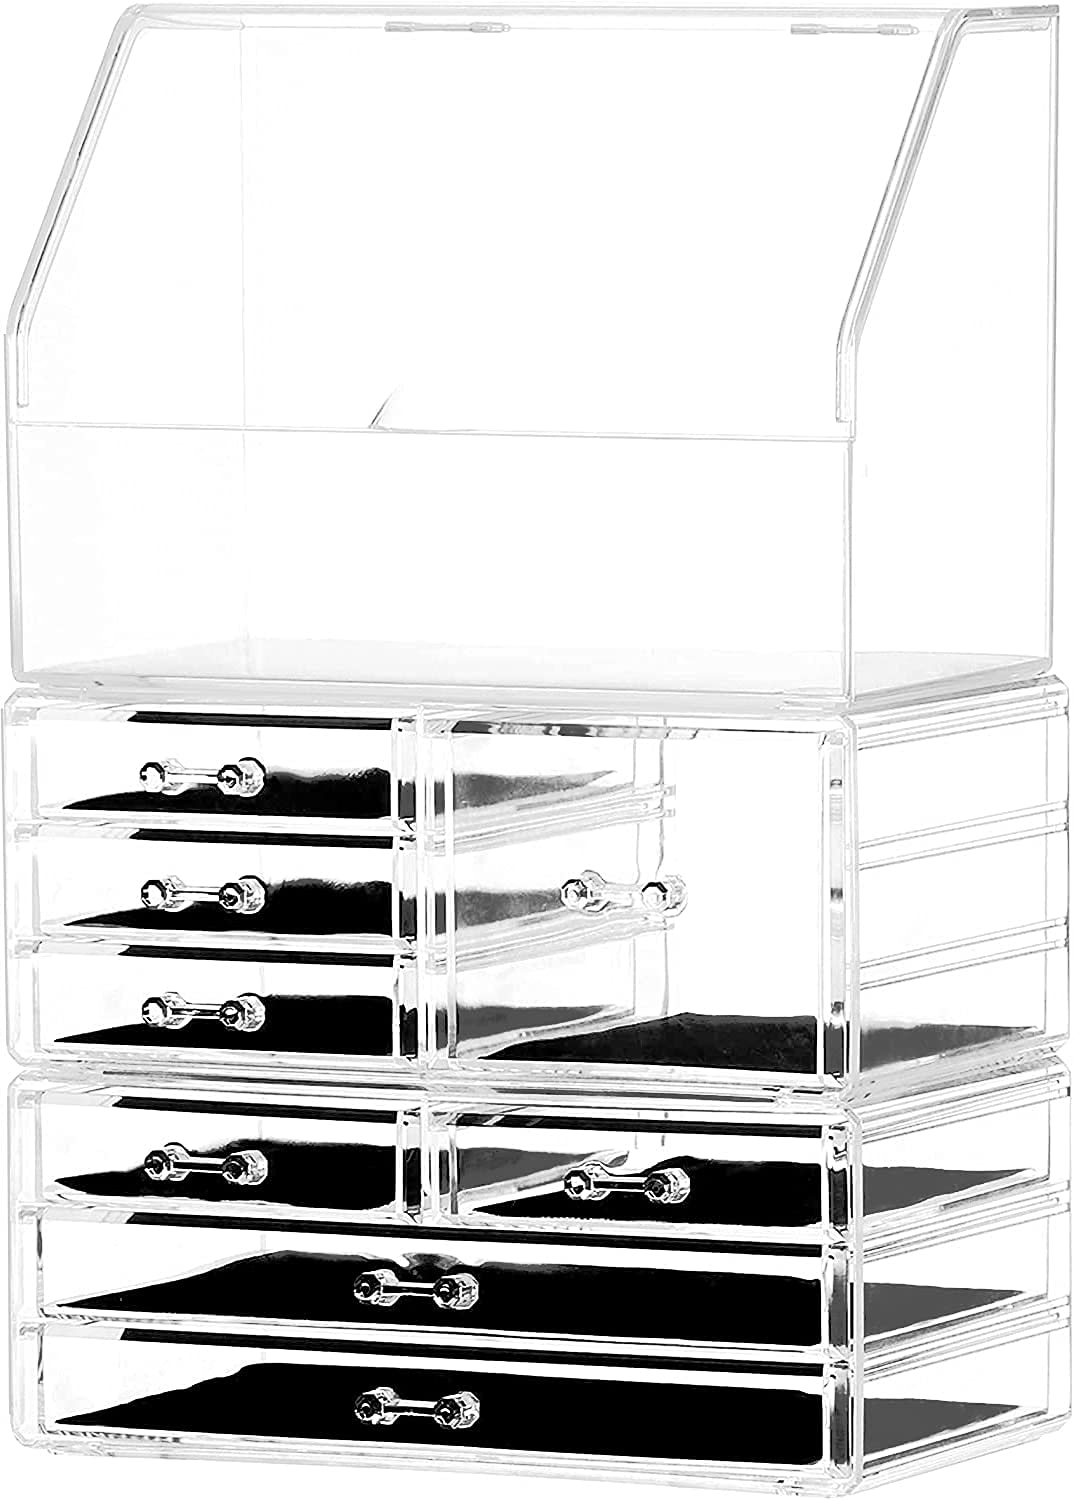 Clear Acrylic Stackable Drawer Organizer Cosmetics Make Up Bathroom Kitchen